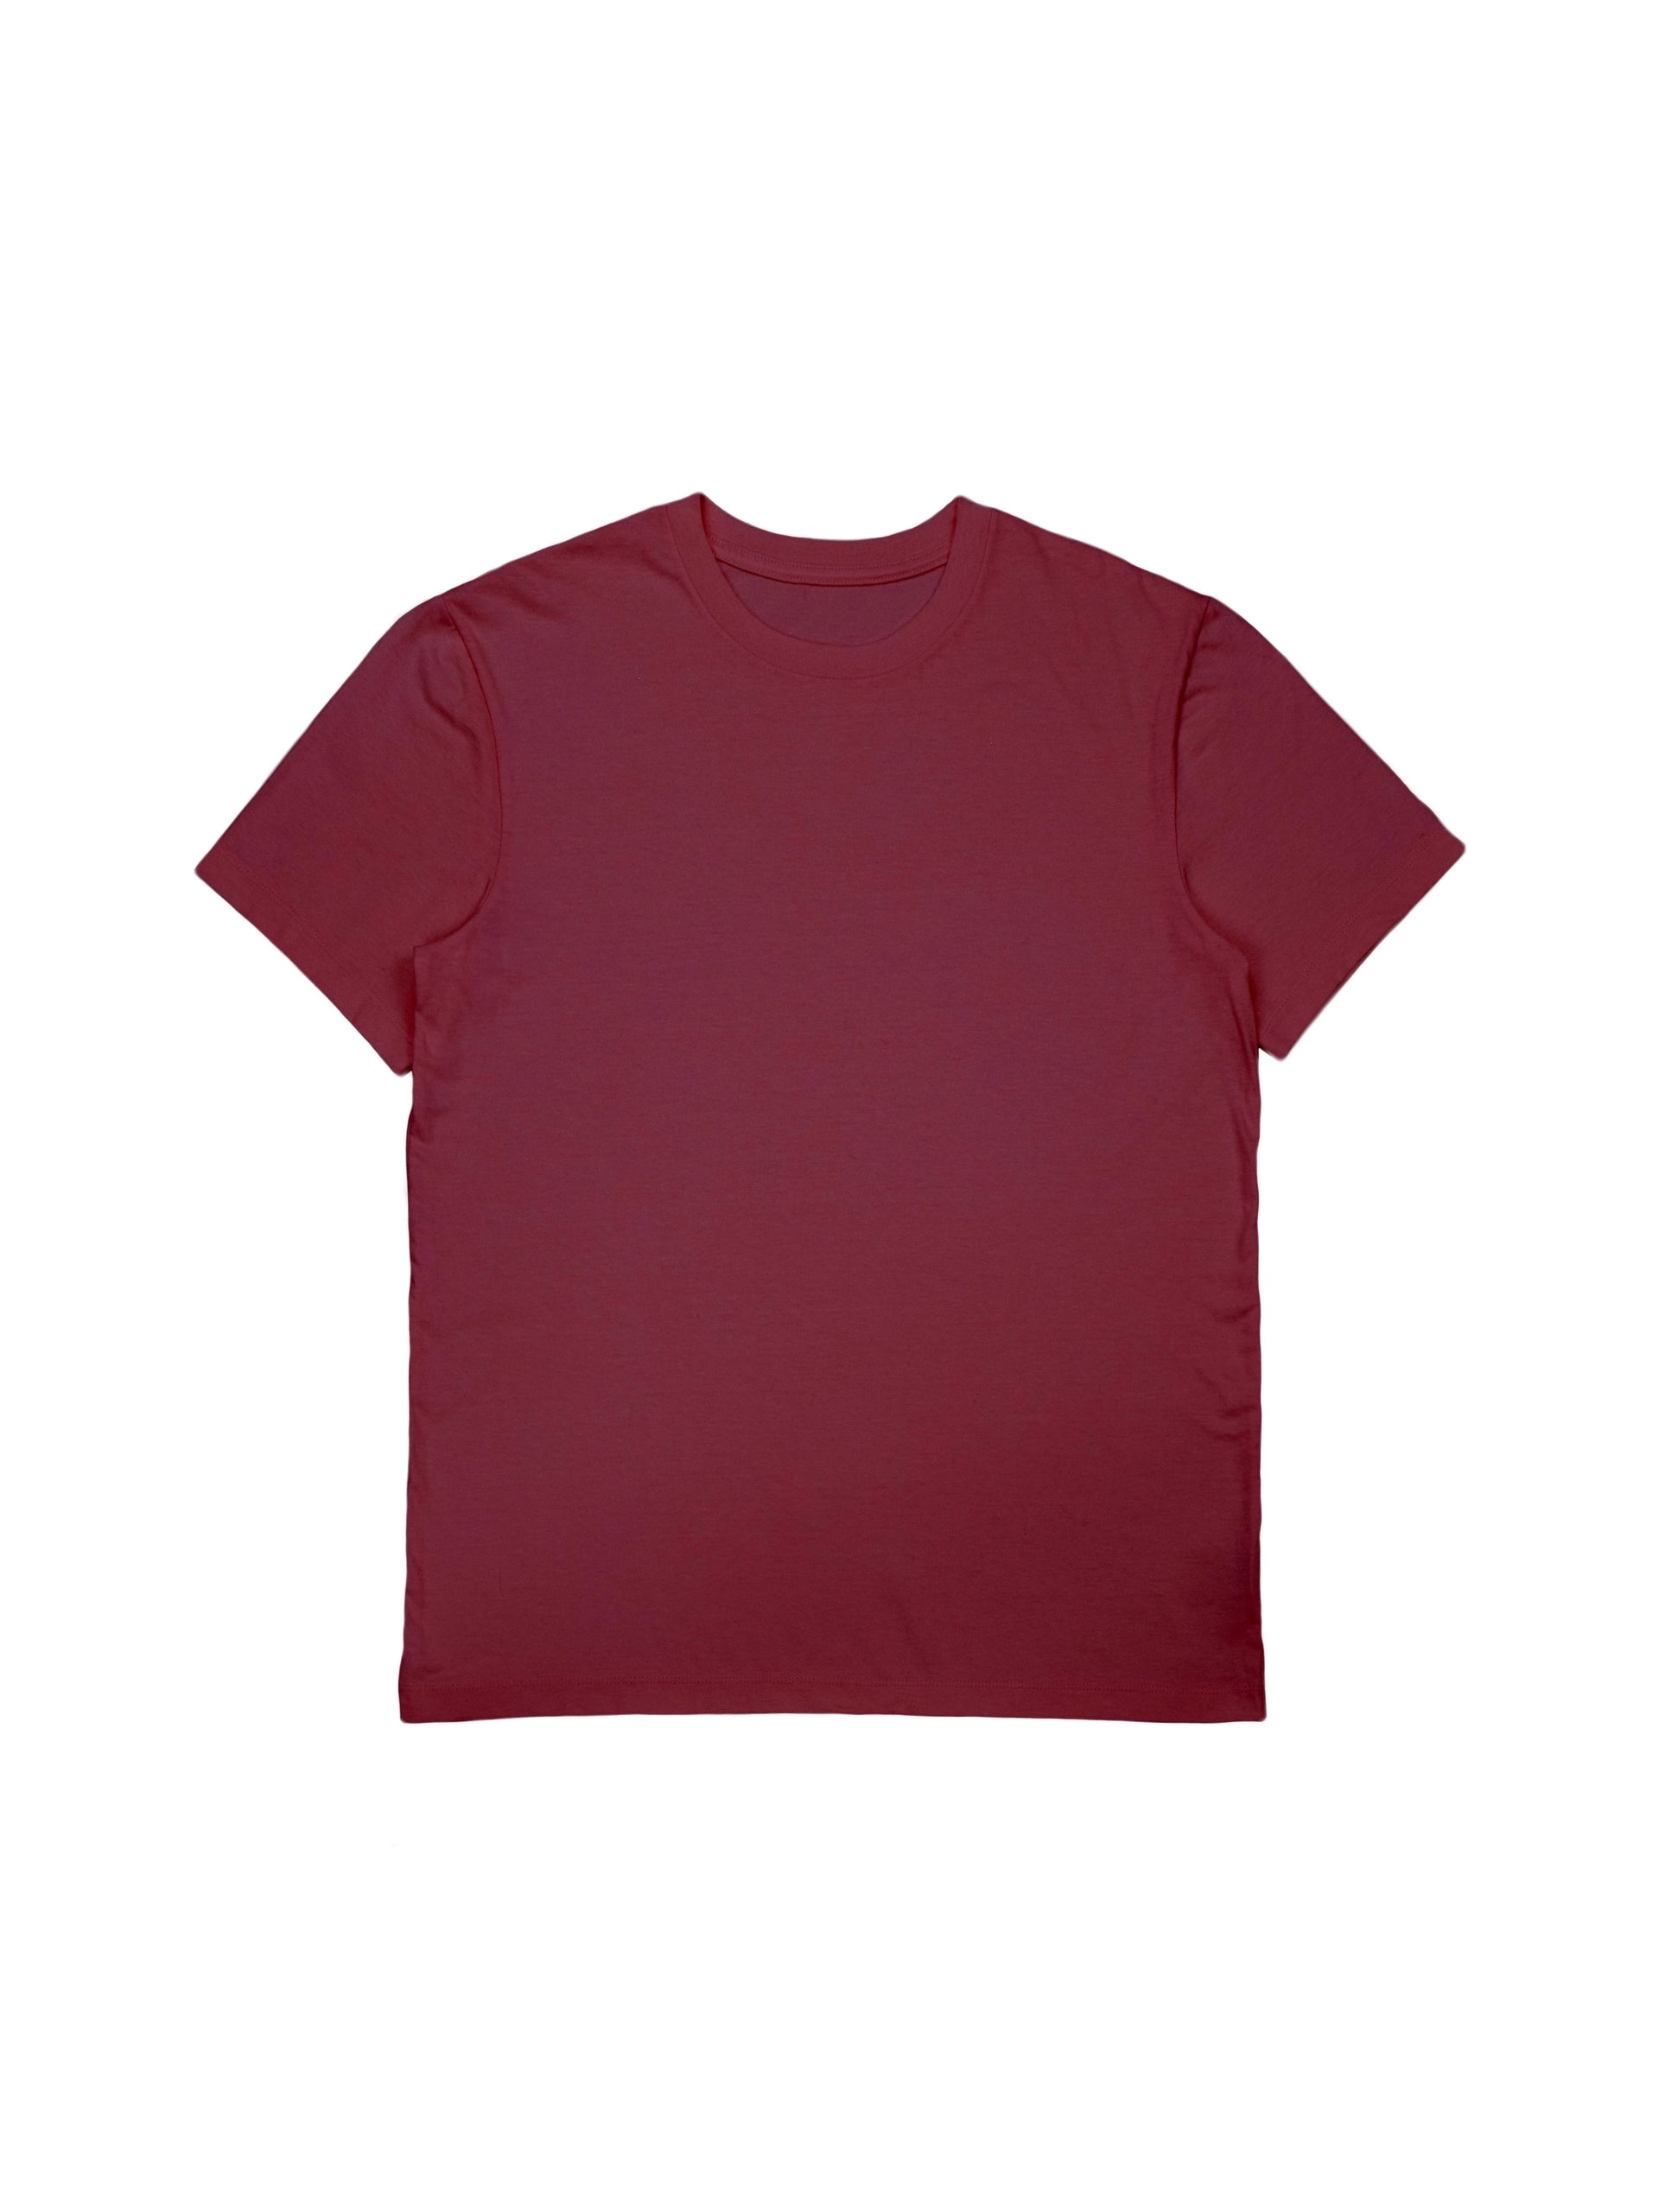 Boxy Fit Burgundy T-Shirt Essential - 100% Organic Cotton Made In Canada –  Gabe Clothing